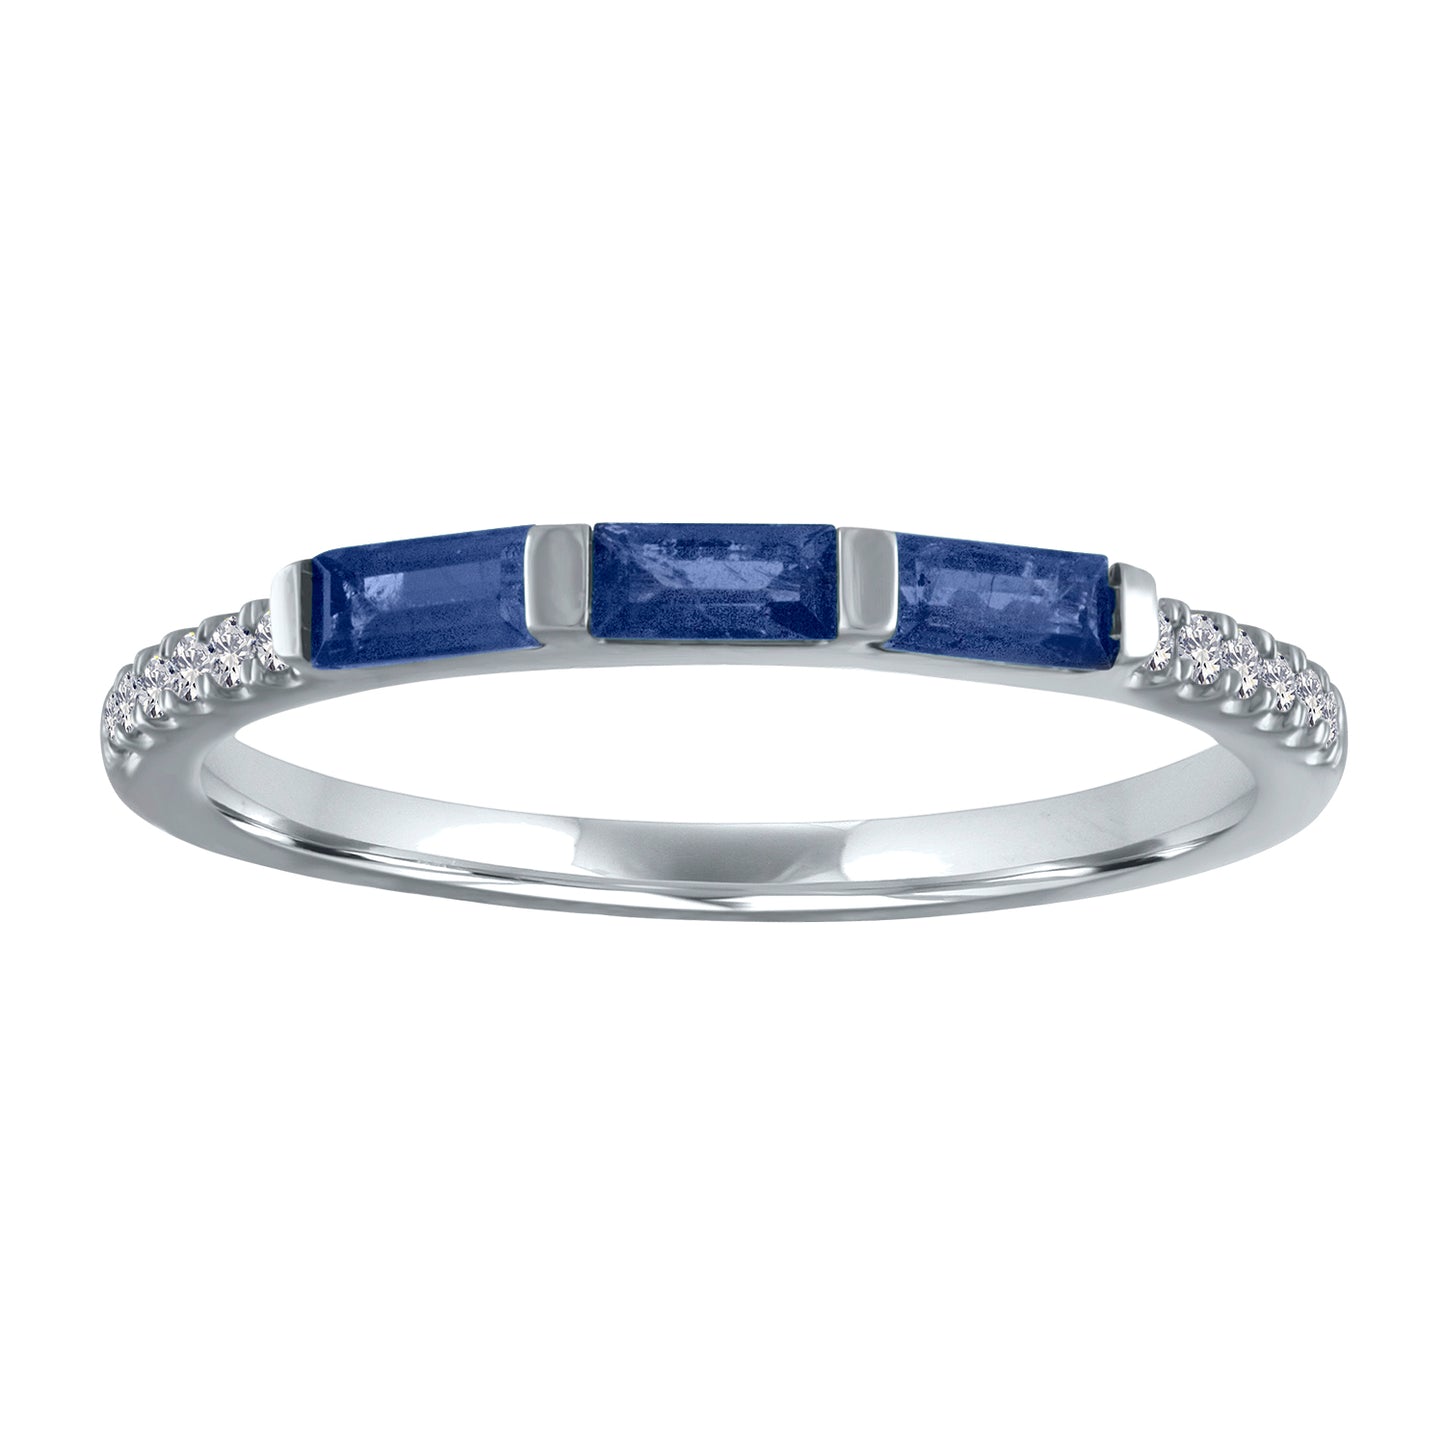 White gold skinny band with three sapphire baguettes and round diamonds on the shank. 